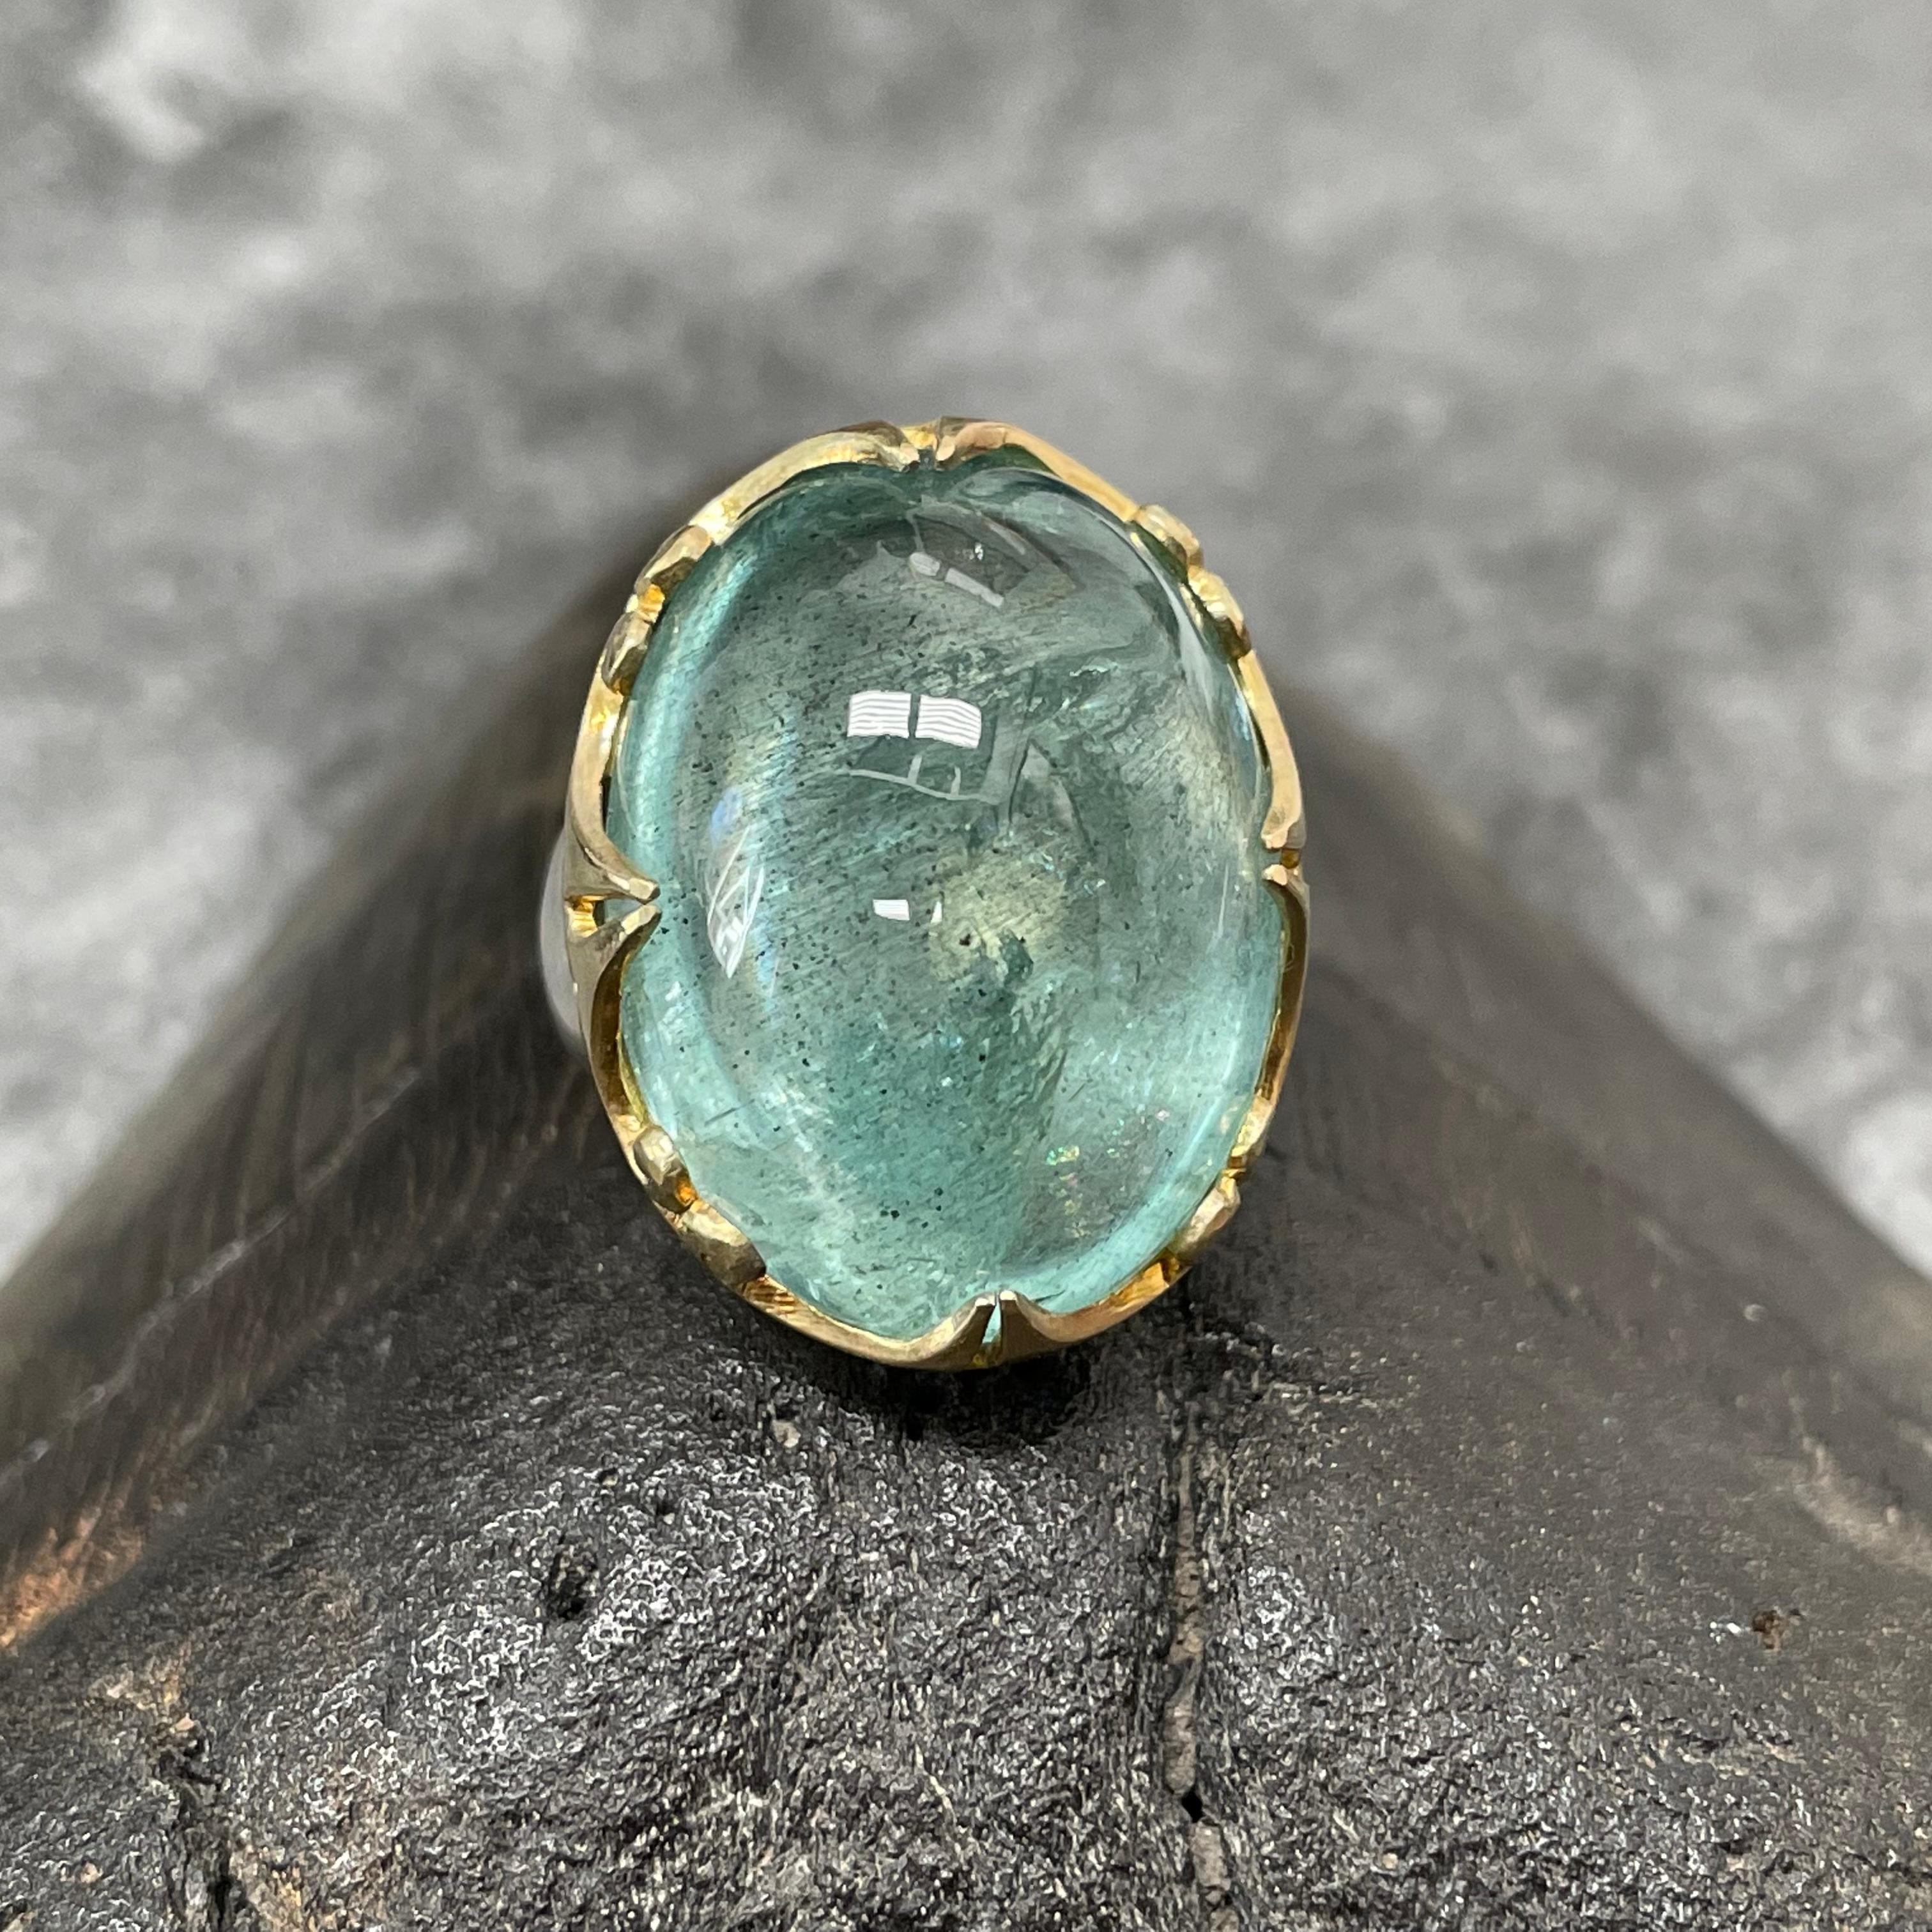 A lively green-blue large 18 x 24 mm oval cabochon aquamarine is held is a sculpted and spiraled carved 18K gold bezel atop a wide matte-finish sterling shank in this eye-catching design.  Very noticeable and unique.  Currently sized 7.  This ring